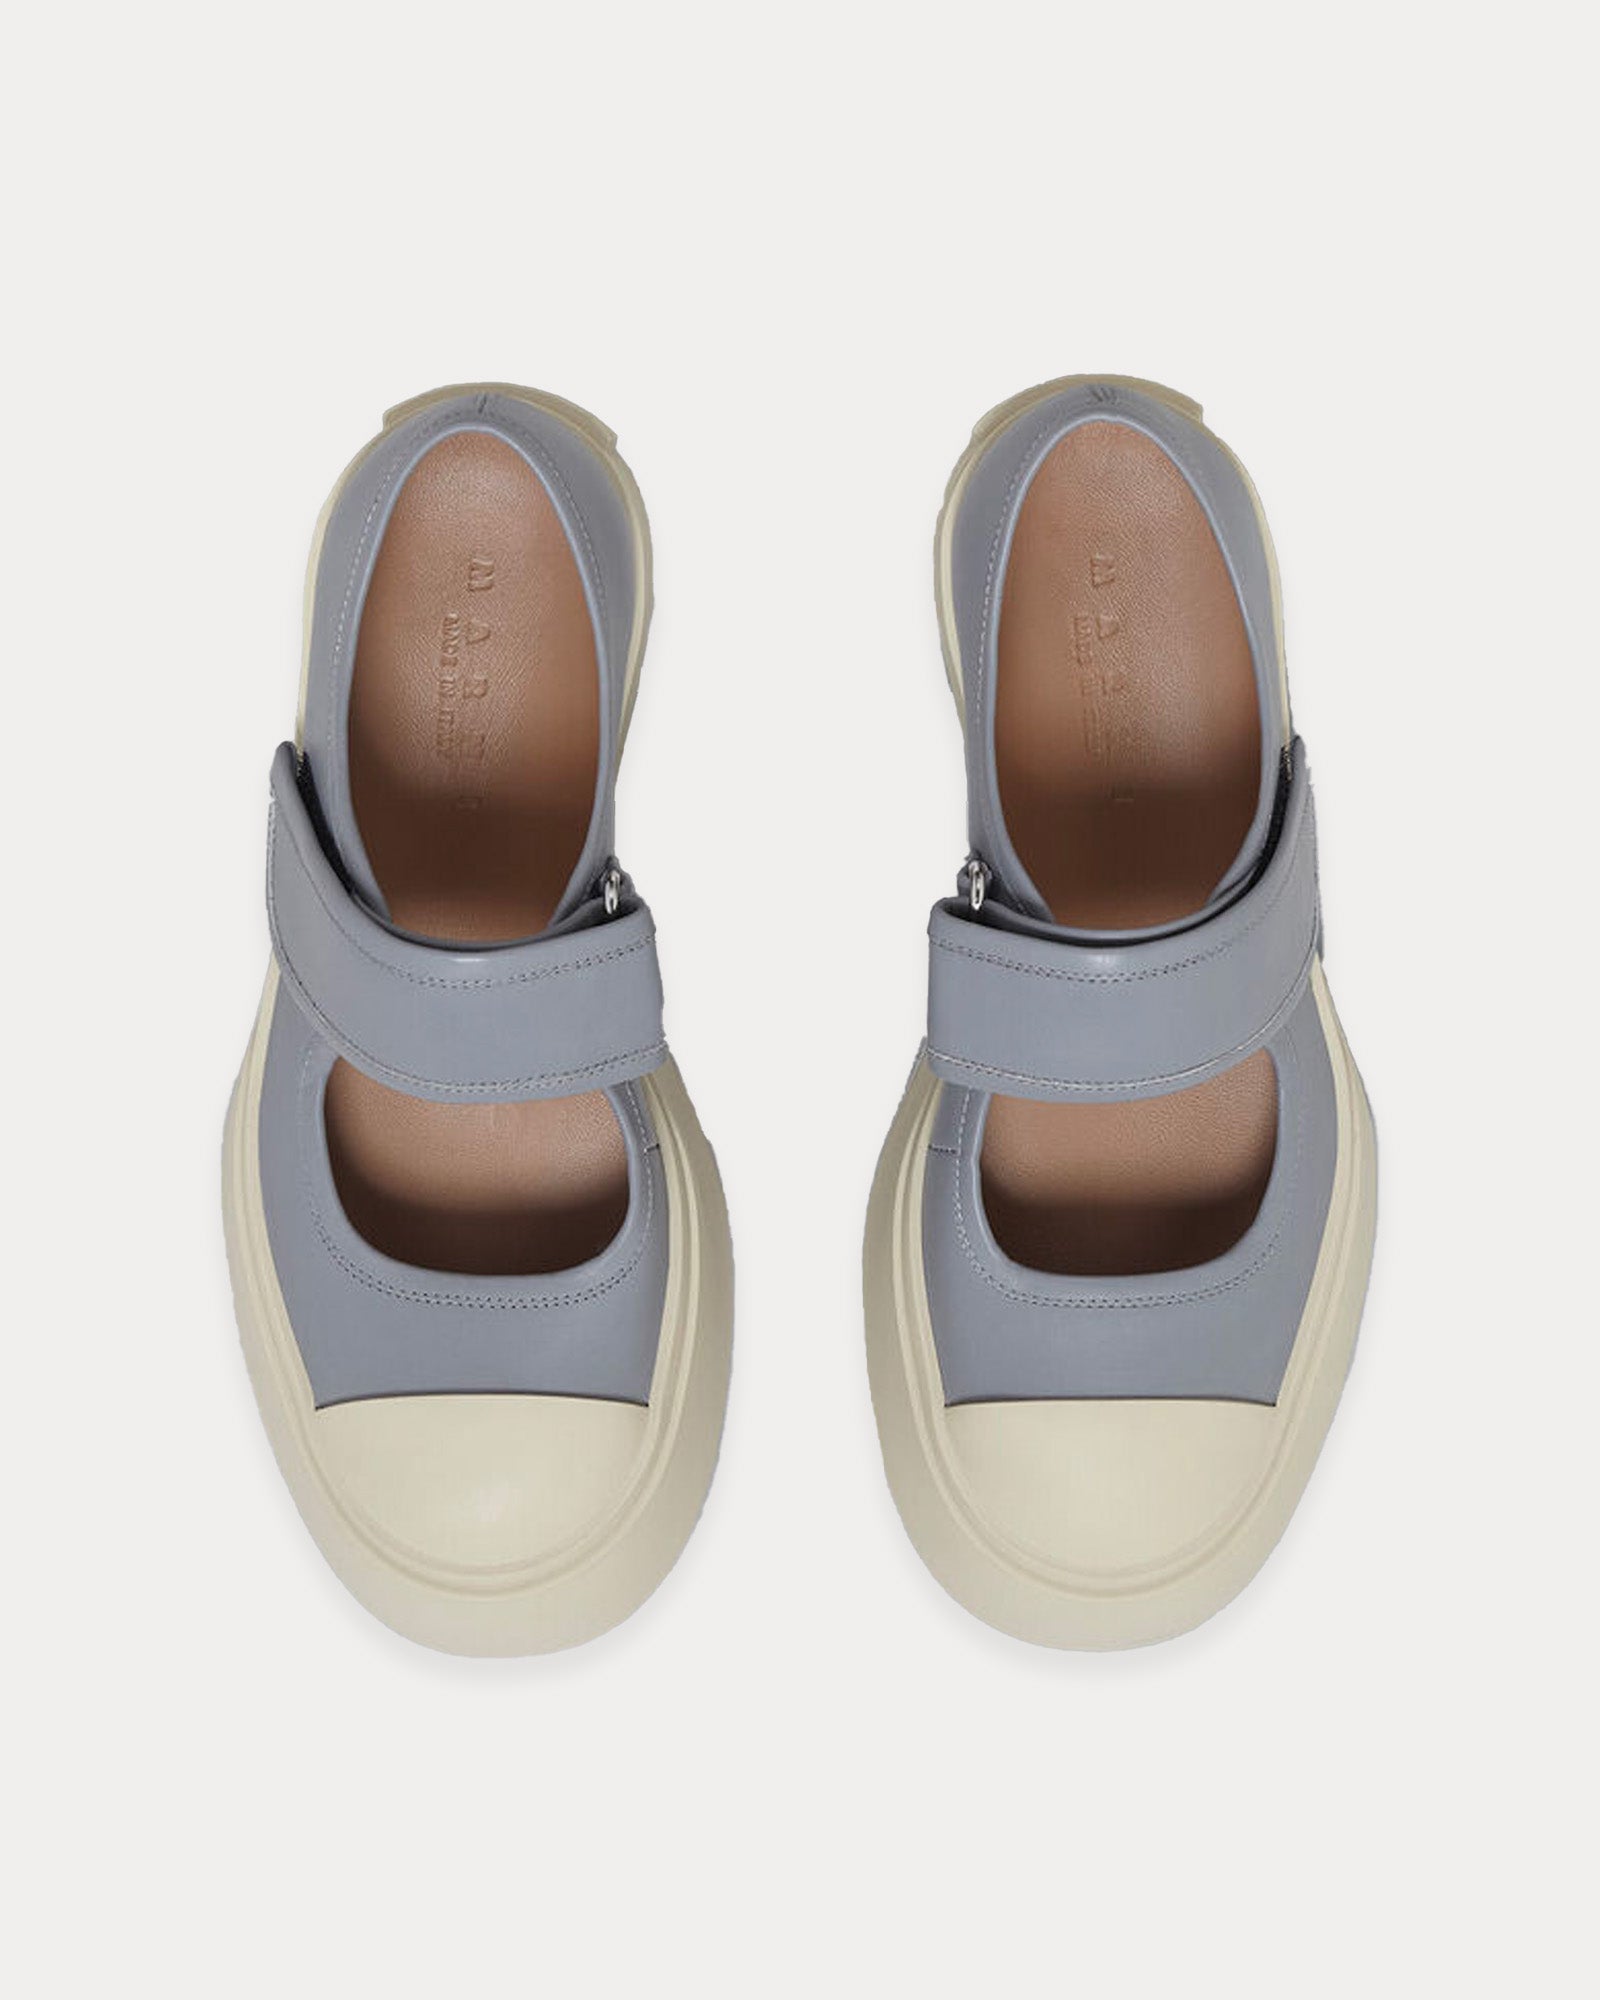 Marni - Mary Jane Leather Grey Slip On Sneakers